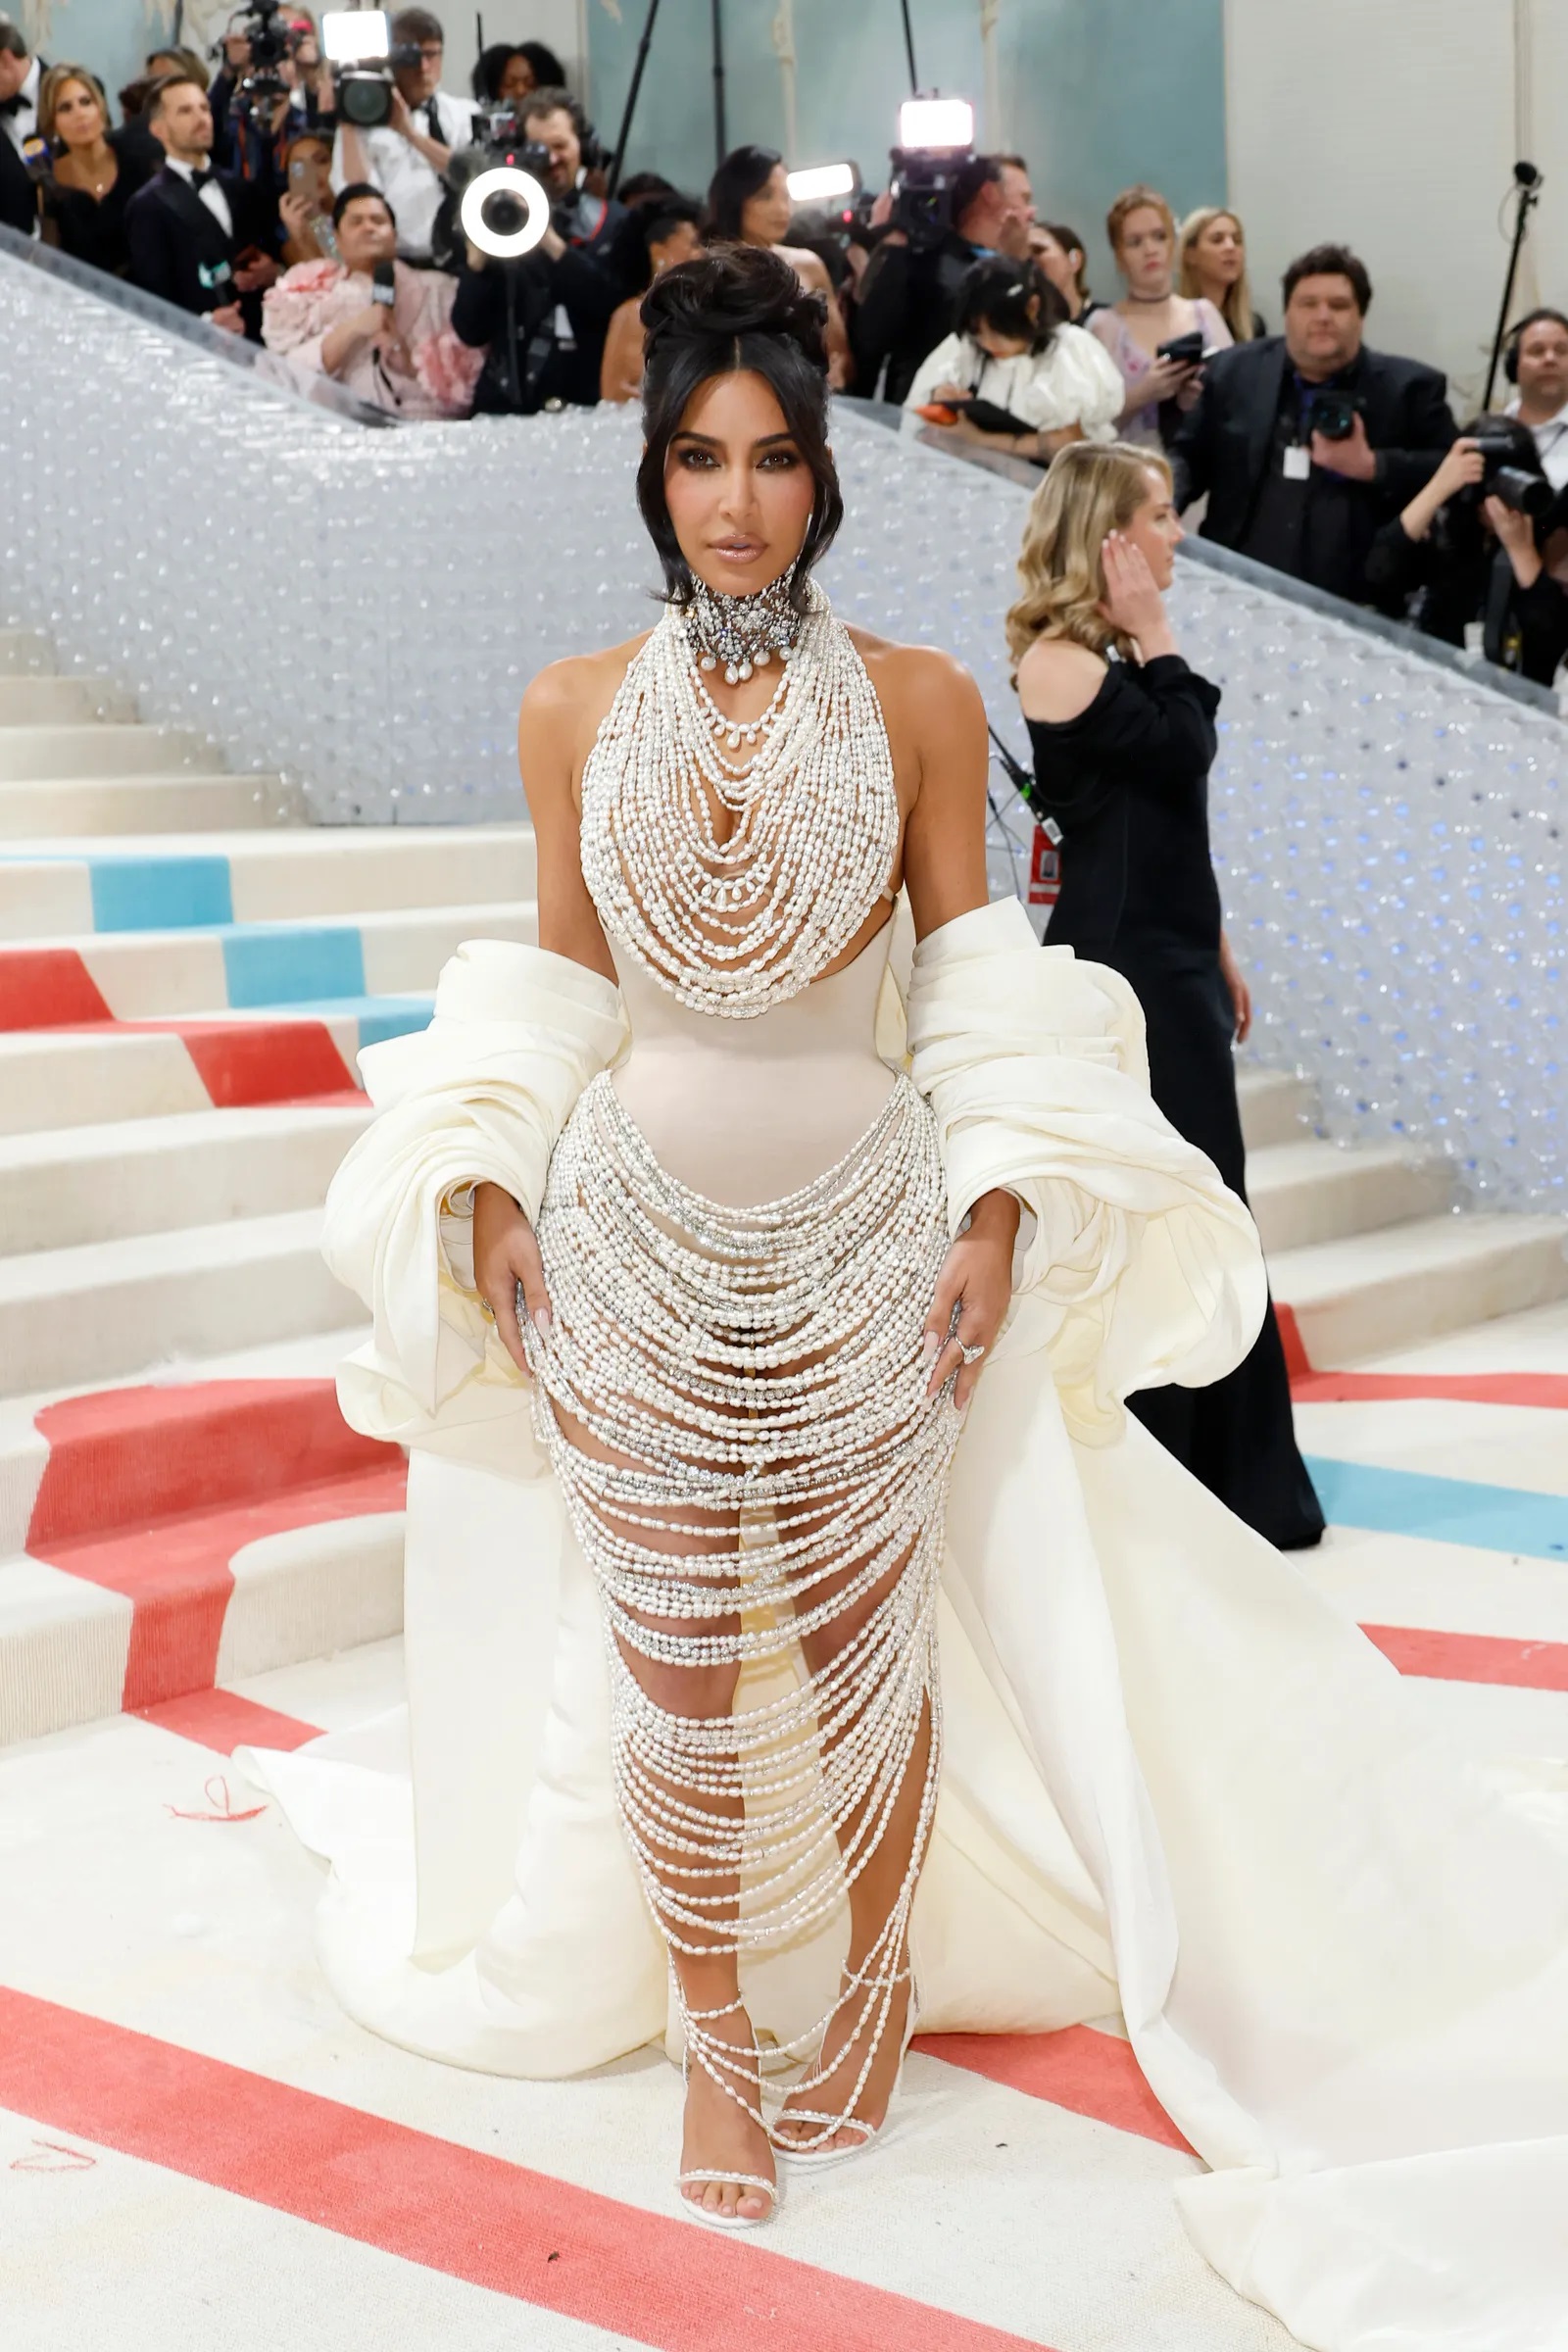 kim_kardashian_pulled_all_the_stops_for_her_met_gala_look_this_year_collaborating_with_schiaparelli_s_daniel_roseberry_to_create_a_glamorous_gown_with_over_50_000_freshwater_pearls_and_16_000_crystals.jpg